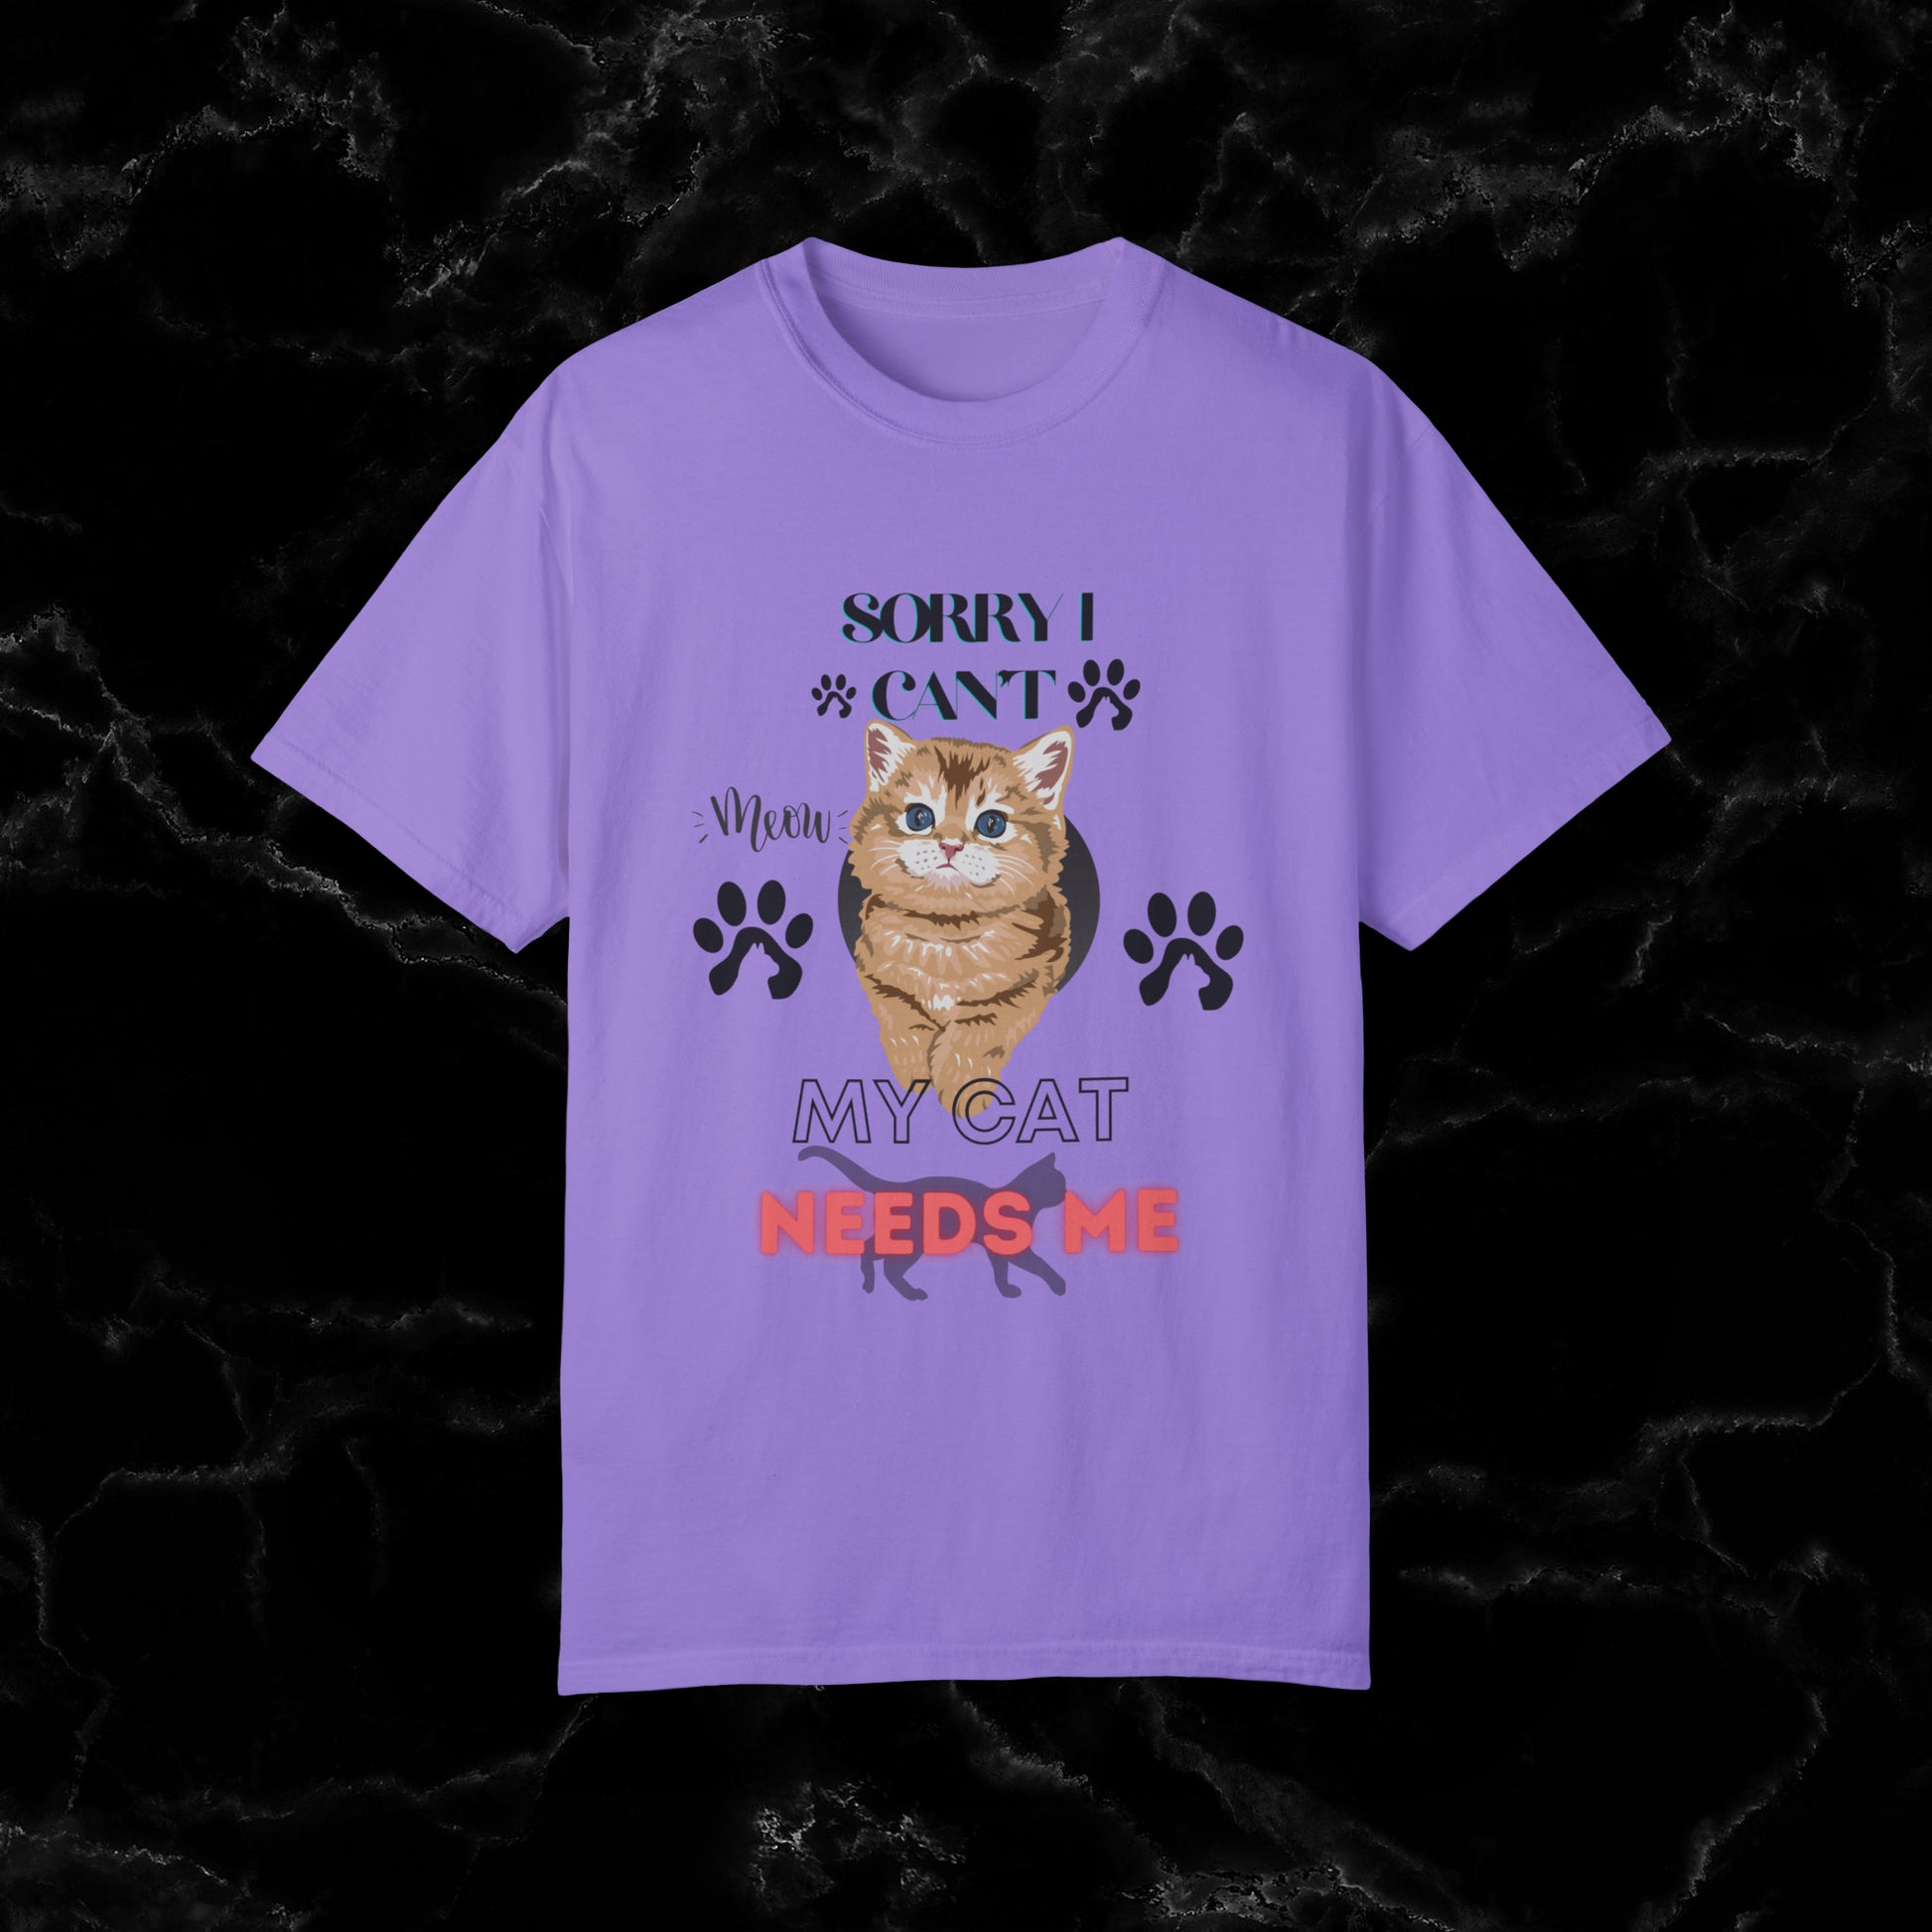 Sorry I Can't, My Cat Needs Me T-Shirt - Perfect Gift for Cat Moms and Animal Lovers T-Shirt Violet S 